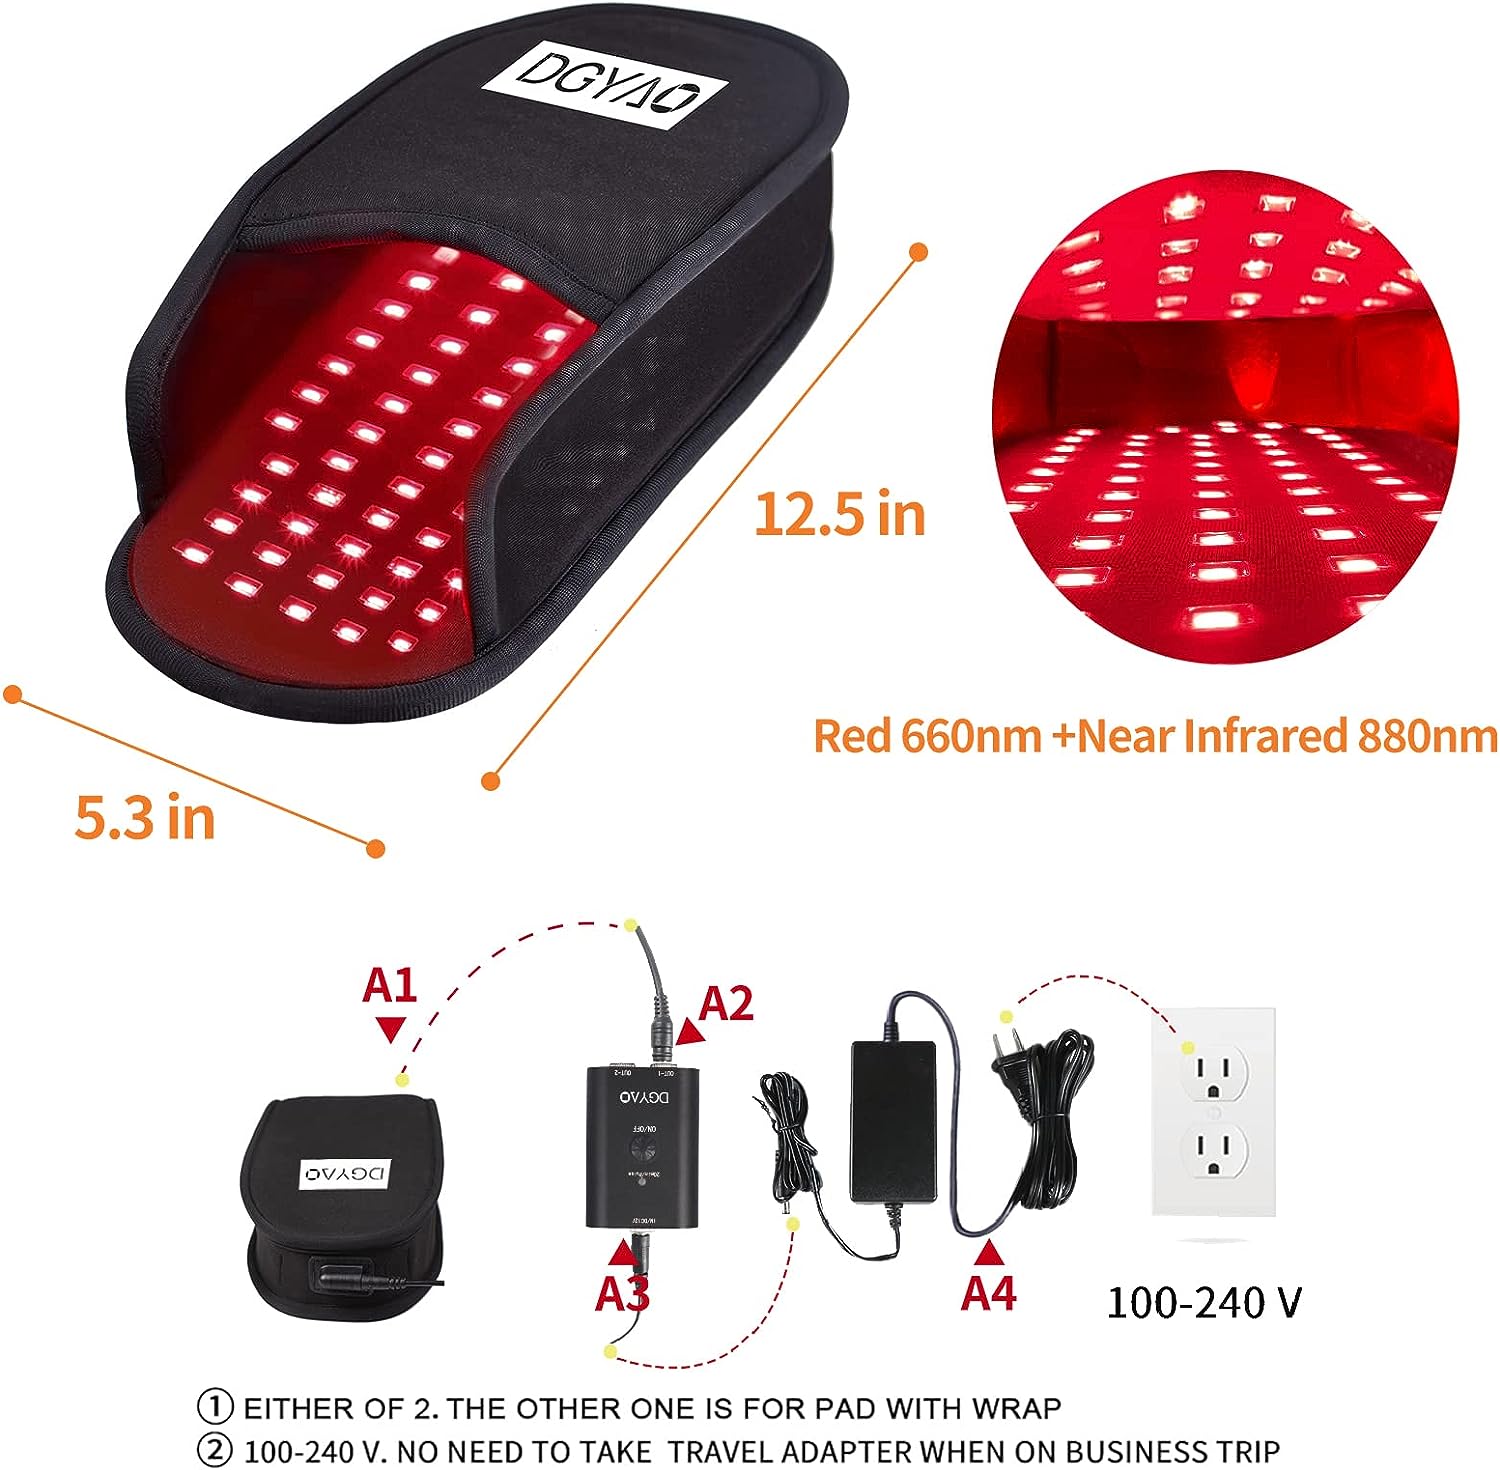 Dgyao Red Light Therapy Slippers Infrared Light Therapy Wrapped Device for Feet Toes Muscle Pain Relief with Pulse Mode Newest Techonology (2 Pads)